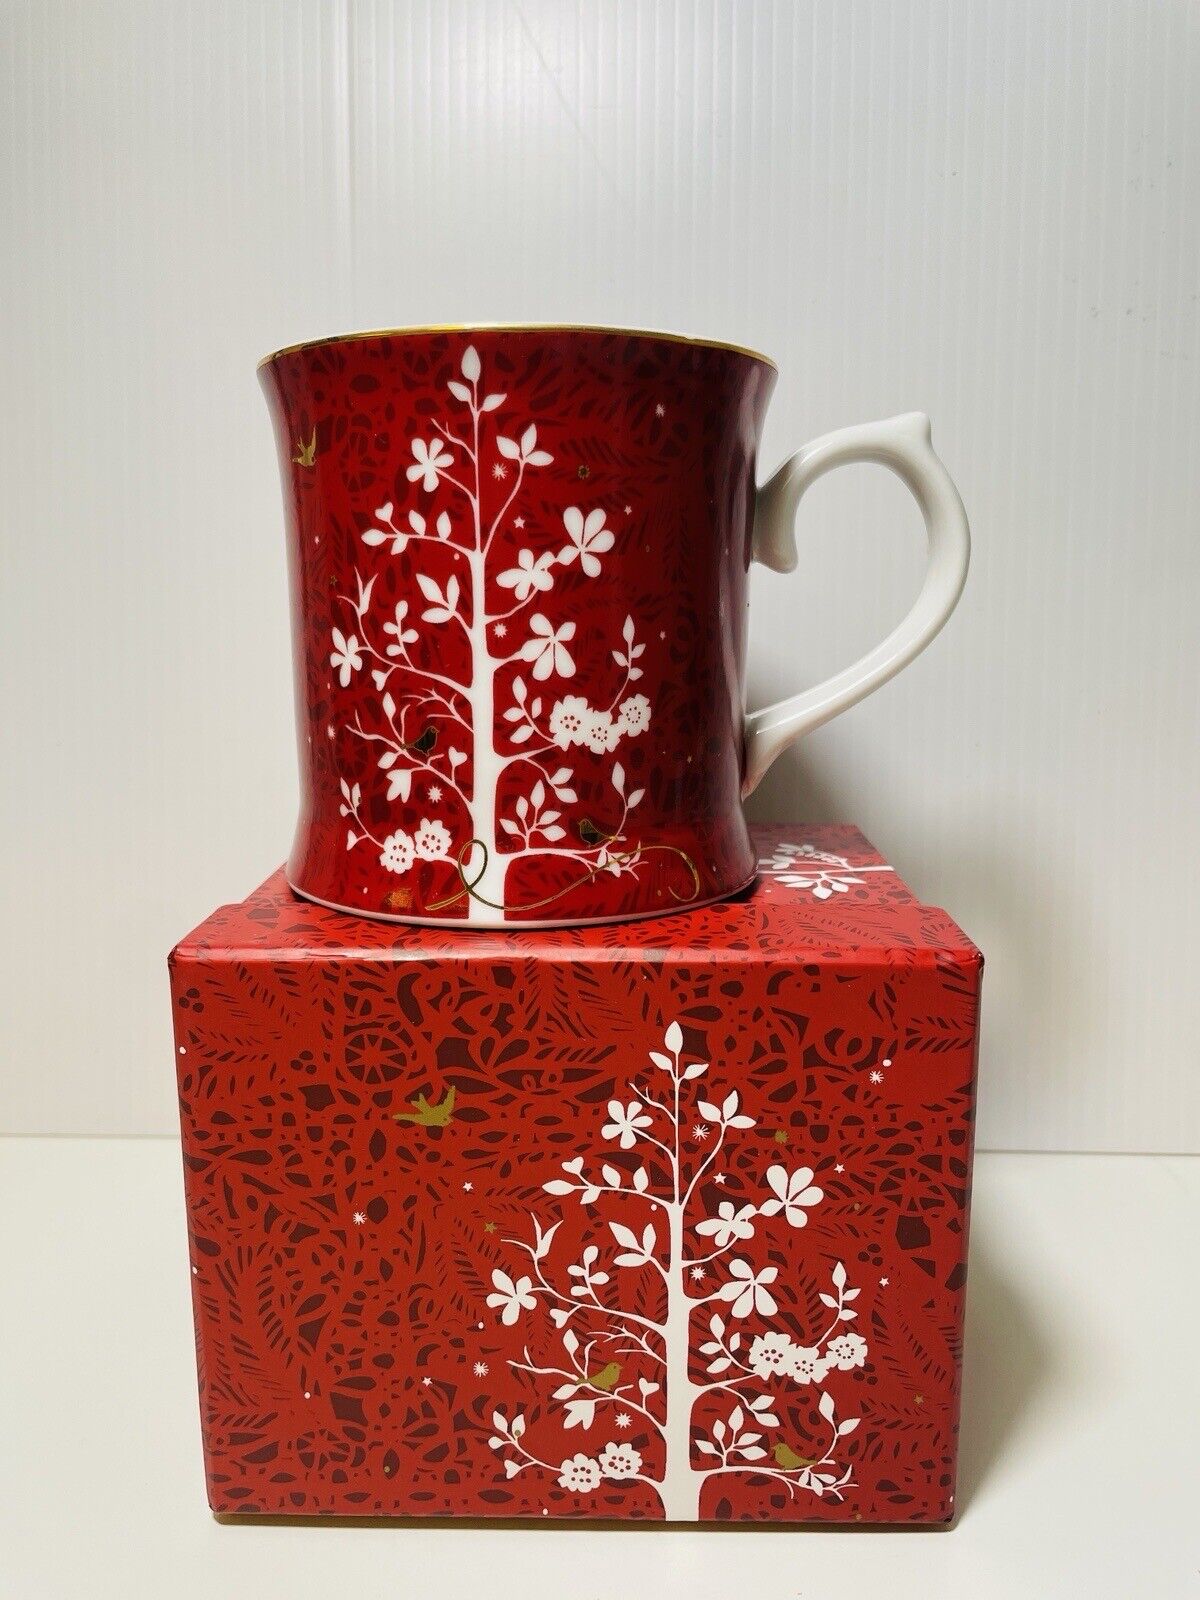 “Let Your Heart Be Light” Wish Tree Coffee Mug Starbucks 2009 Red New in Box